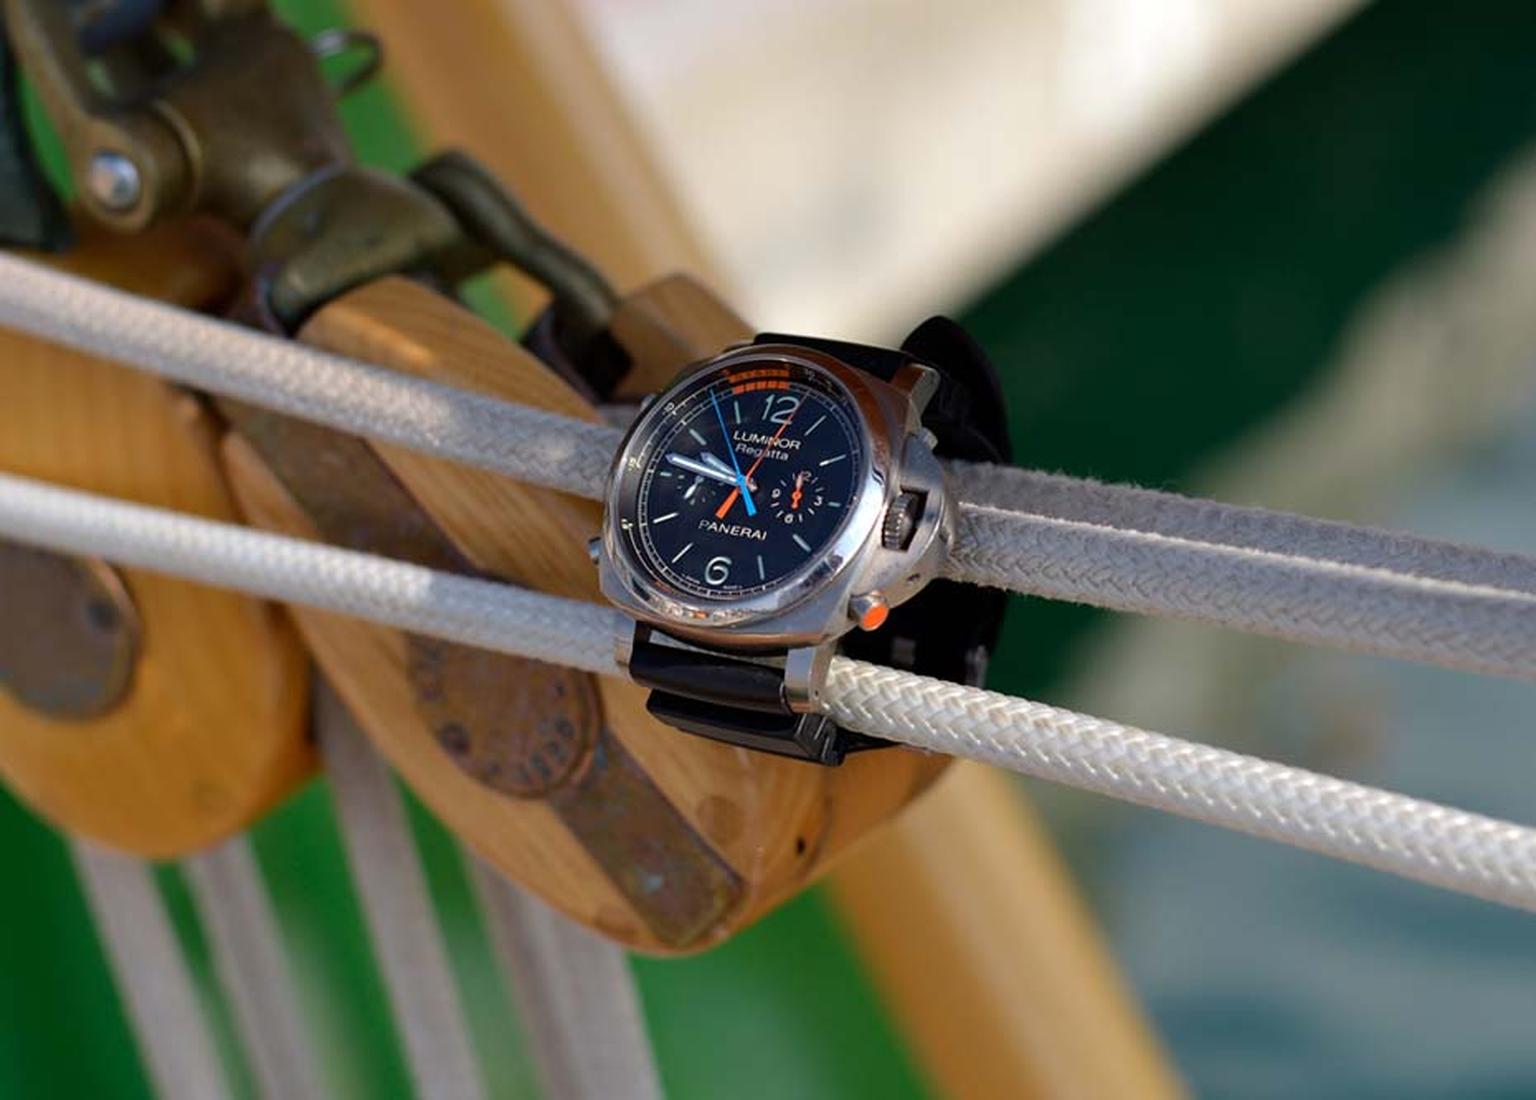 A sailor's best mate, the Panerai Luminor 1950 Regatta 3 Days Chrono Flyback Automatic watch, includes a handy tachymeter scale to gauge the speed of your wake in nautical knots.